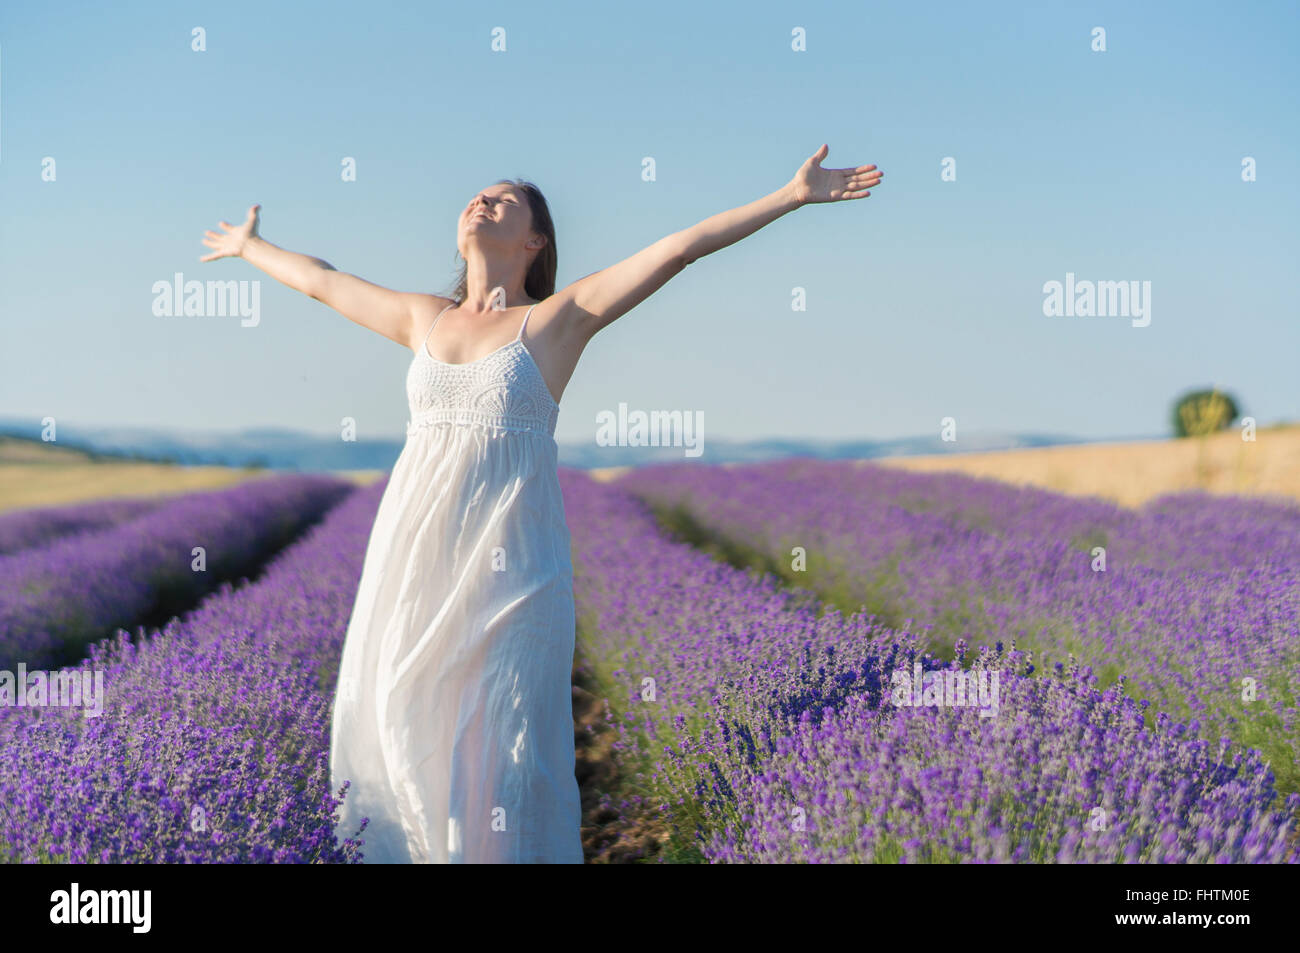 Beautiful young woman wearing a white dress celebrating the beauty of life standing in the middle of a lavender field in bloom. Stock Photo